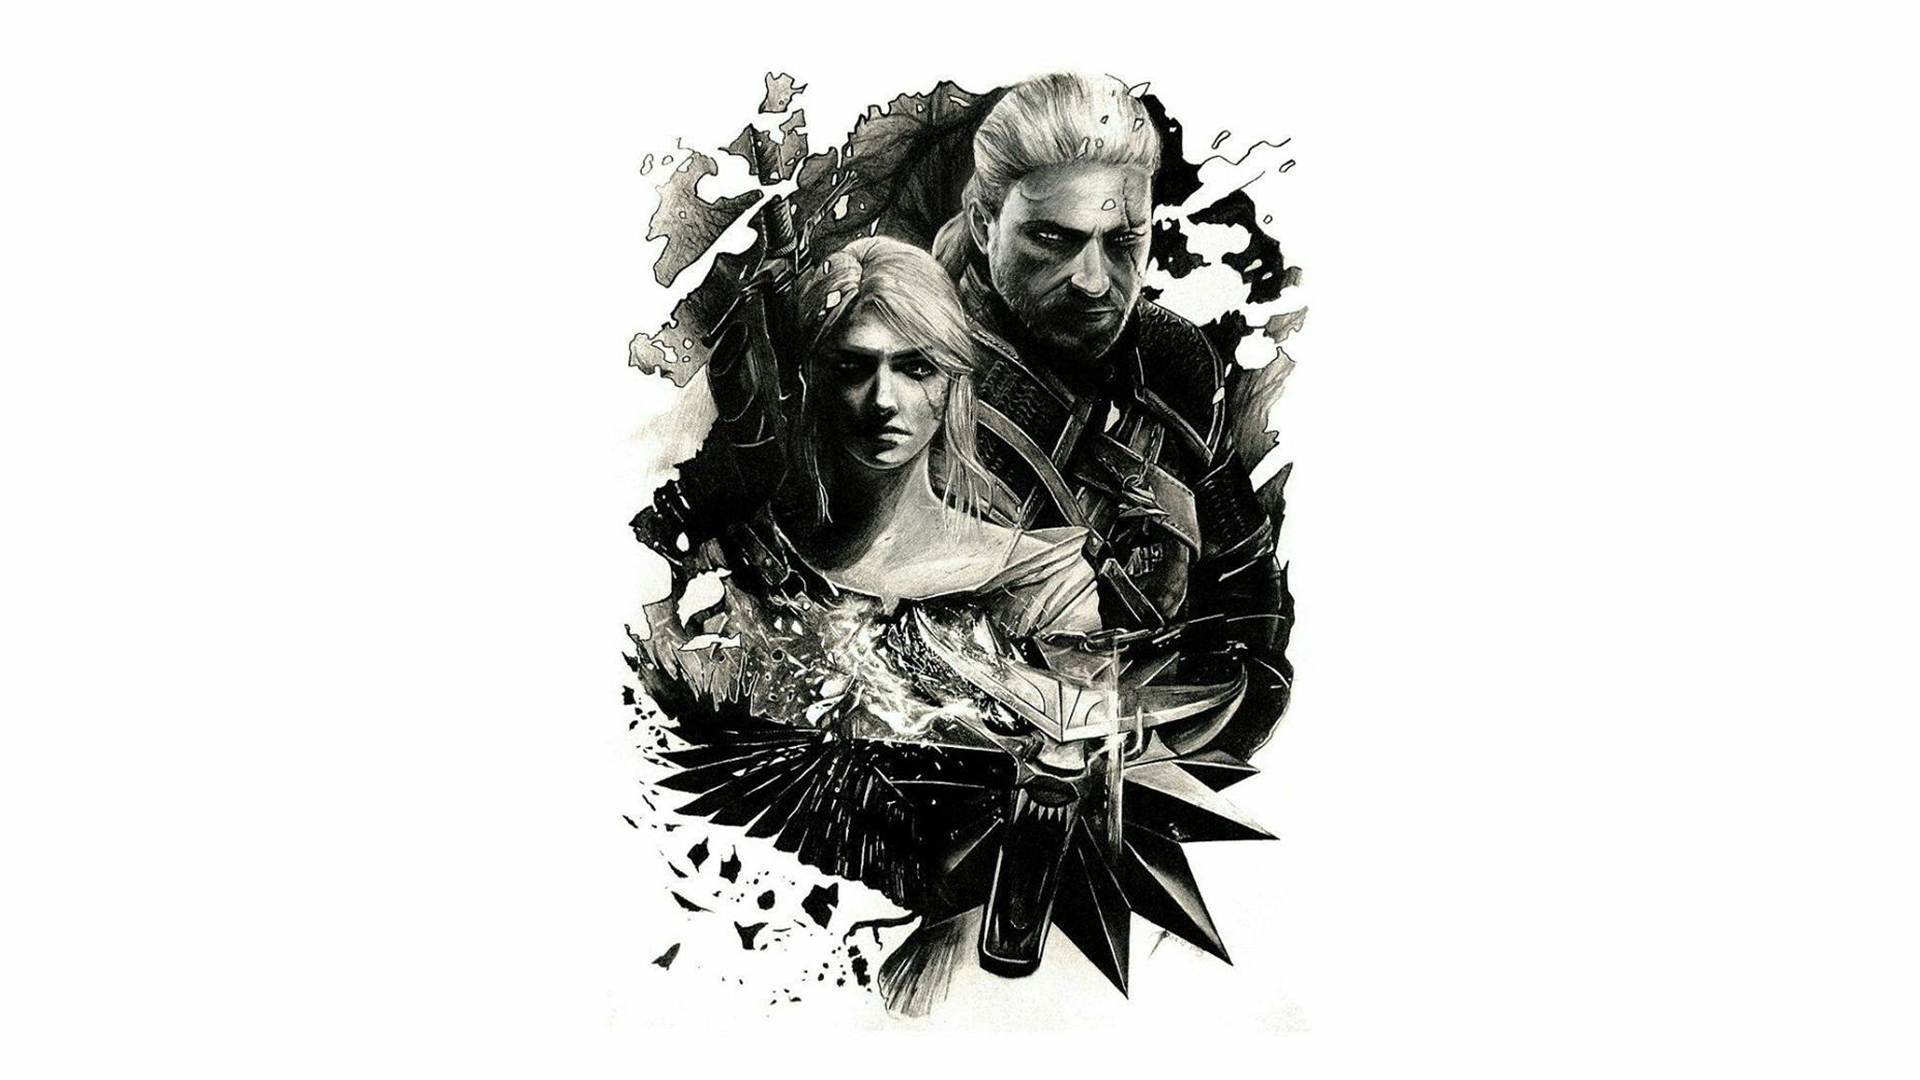 General 1920x1080 Cirilla Fiona Elen Riannon Geralt of Rivia The Witcher The Witcher 3: Wild Hunt simple background monochrome frontal view video games video game characters CD Projekt RED Book characters